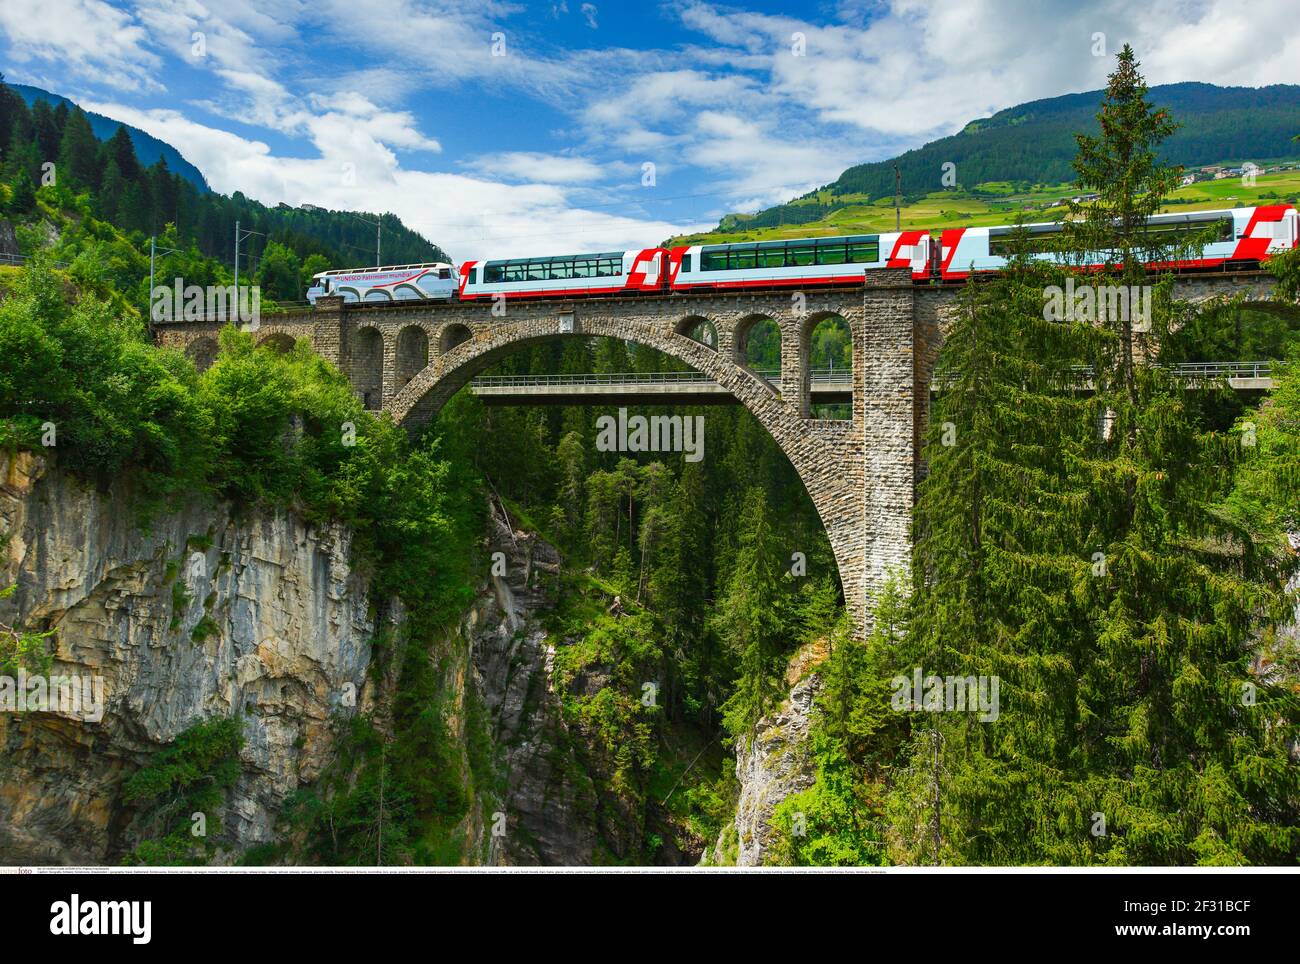 https://c8.alamy.com/comp/2F31BCF/geography-travel-switzerland-solisbruecke-grisons-additional-rights-clearance-info-not-available-2F31BCF.jpg